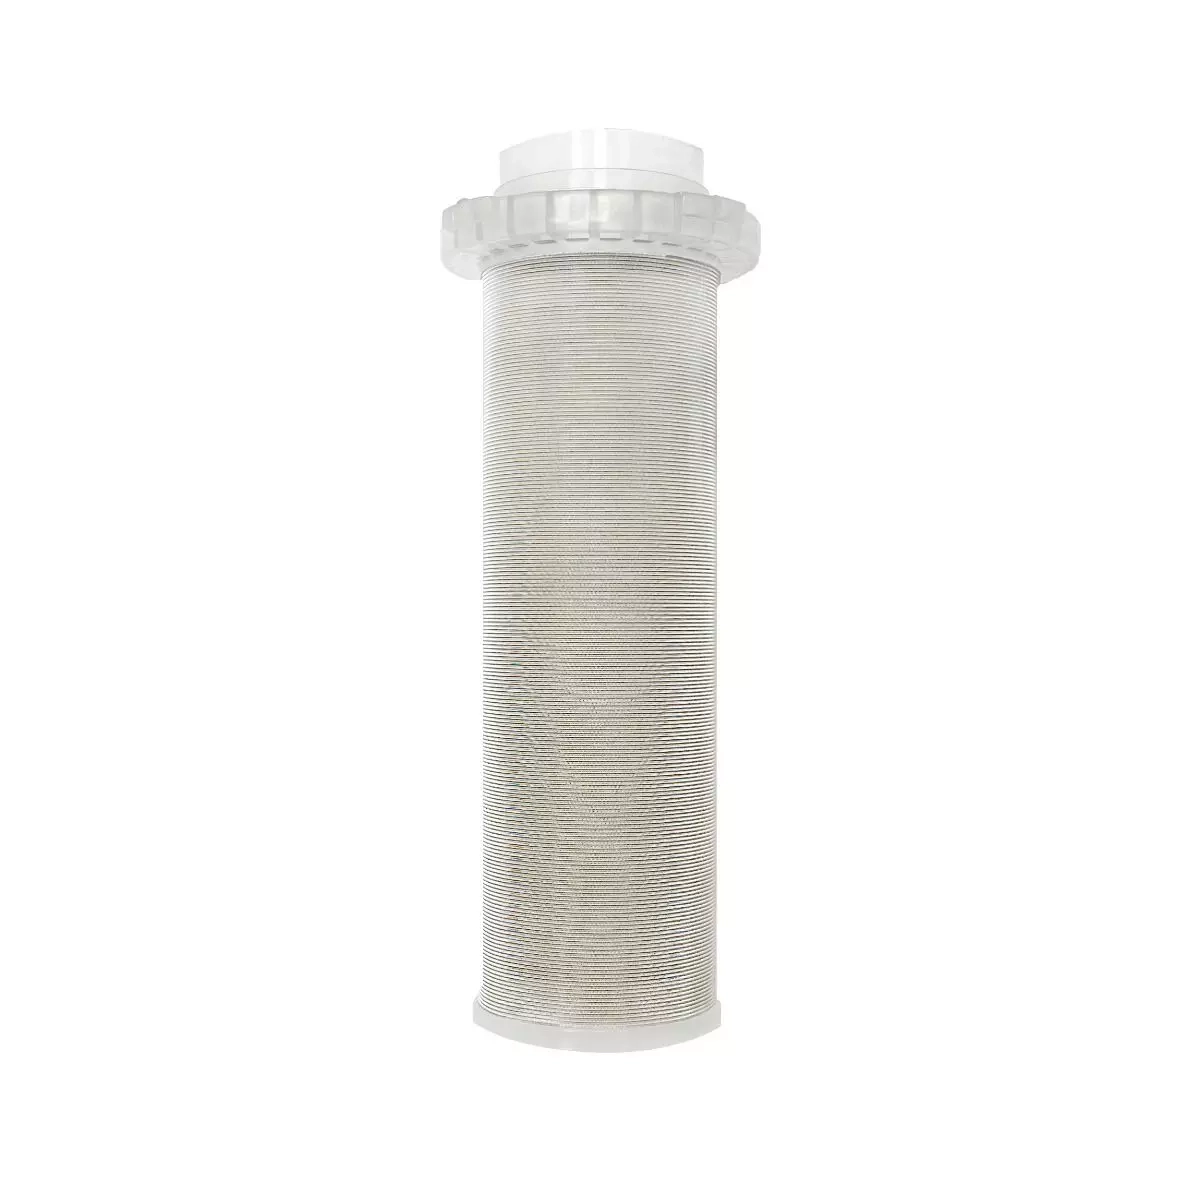 Replacement Cartridge For Aquaboon Spin Down Sediment Water Pre Filter, 200 Micron